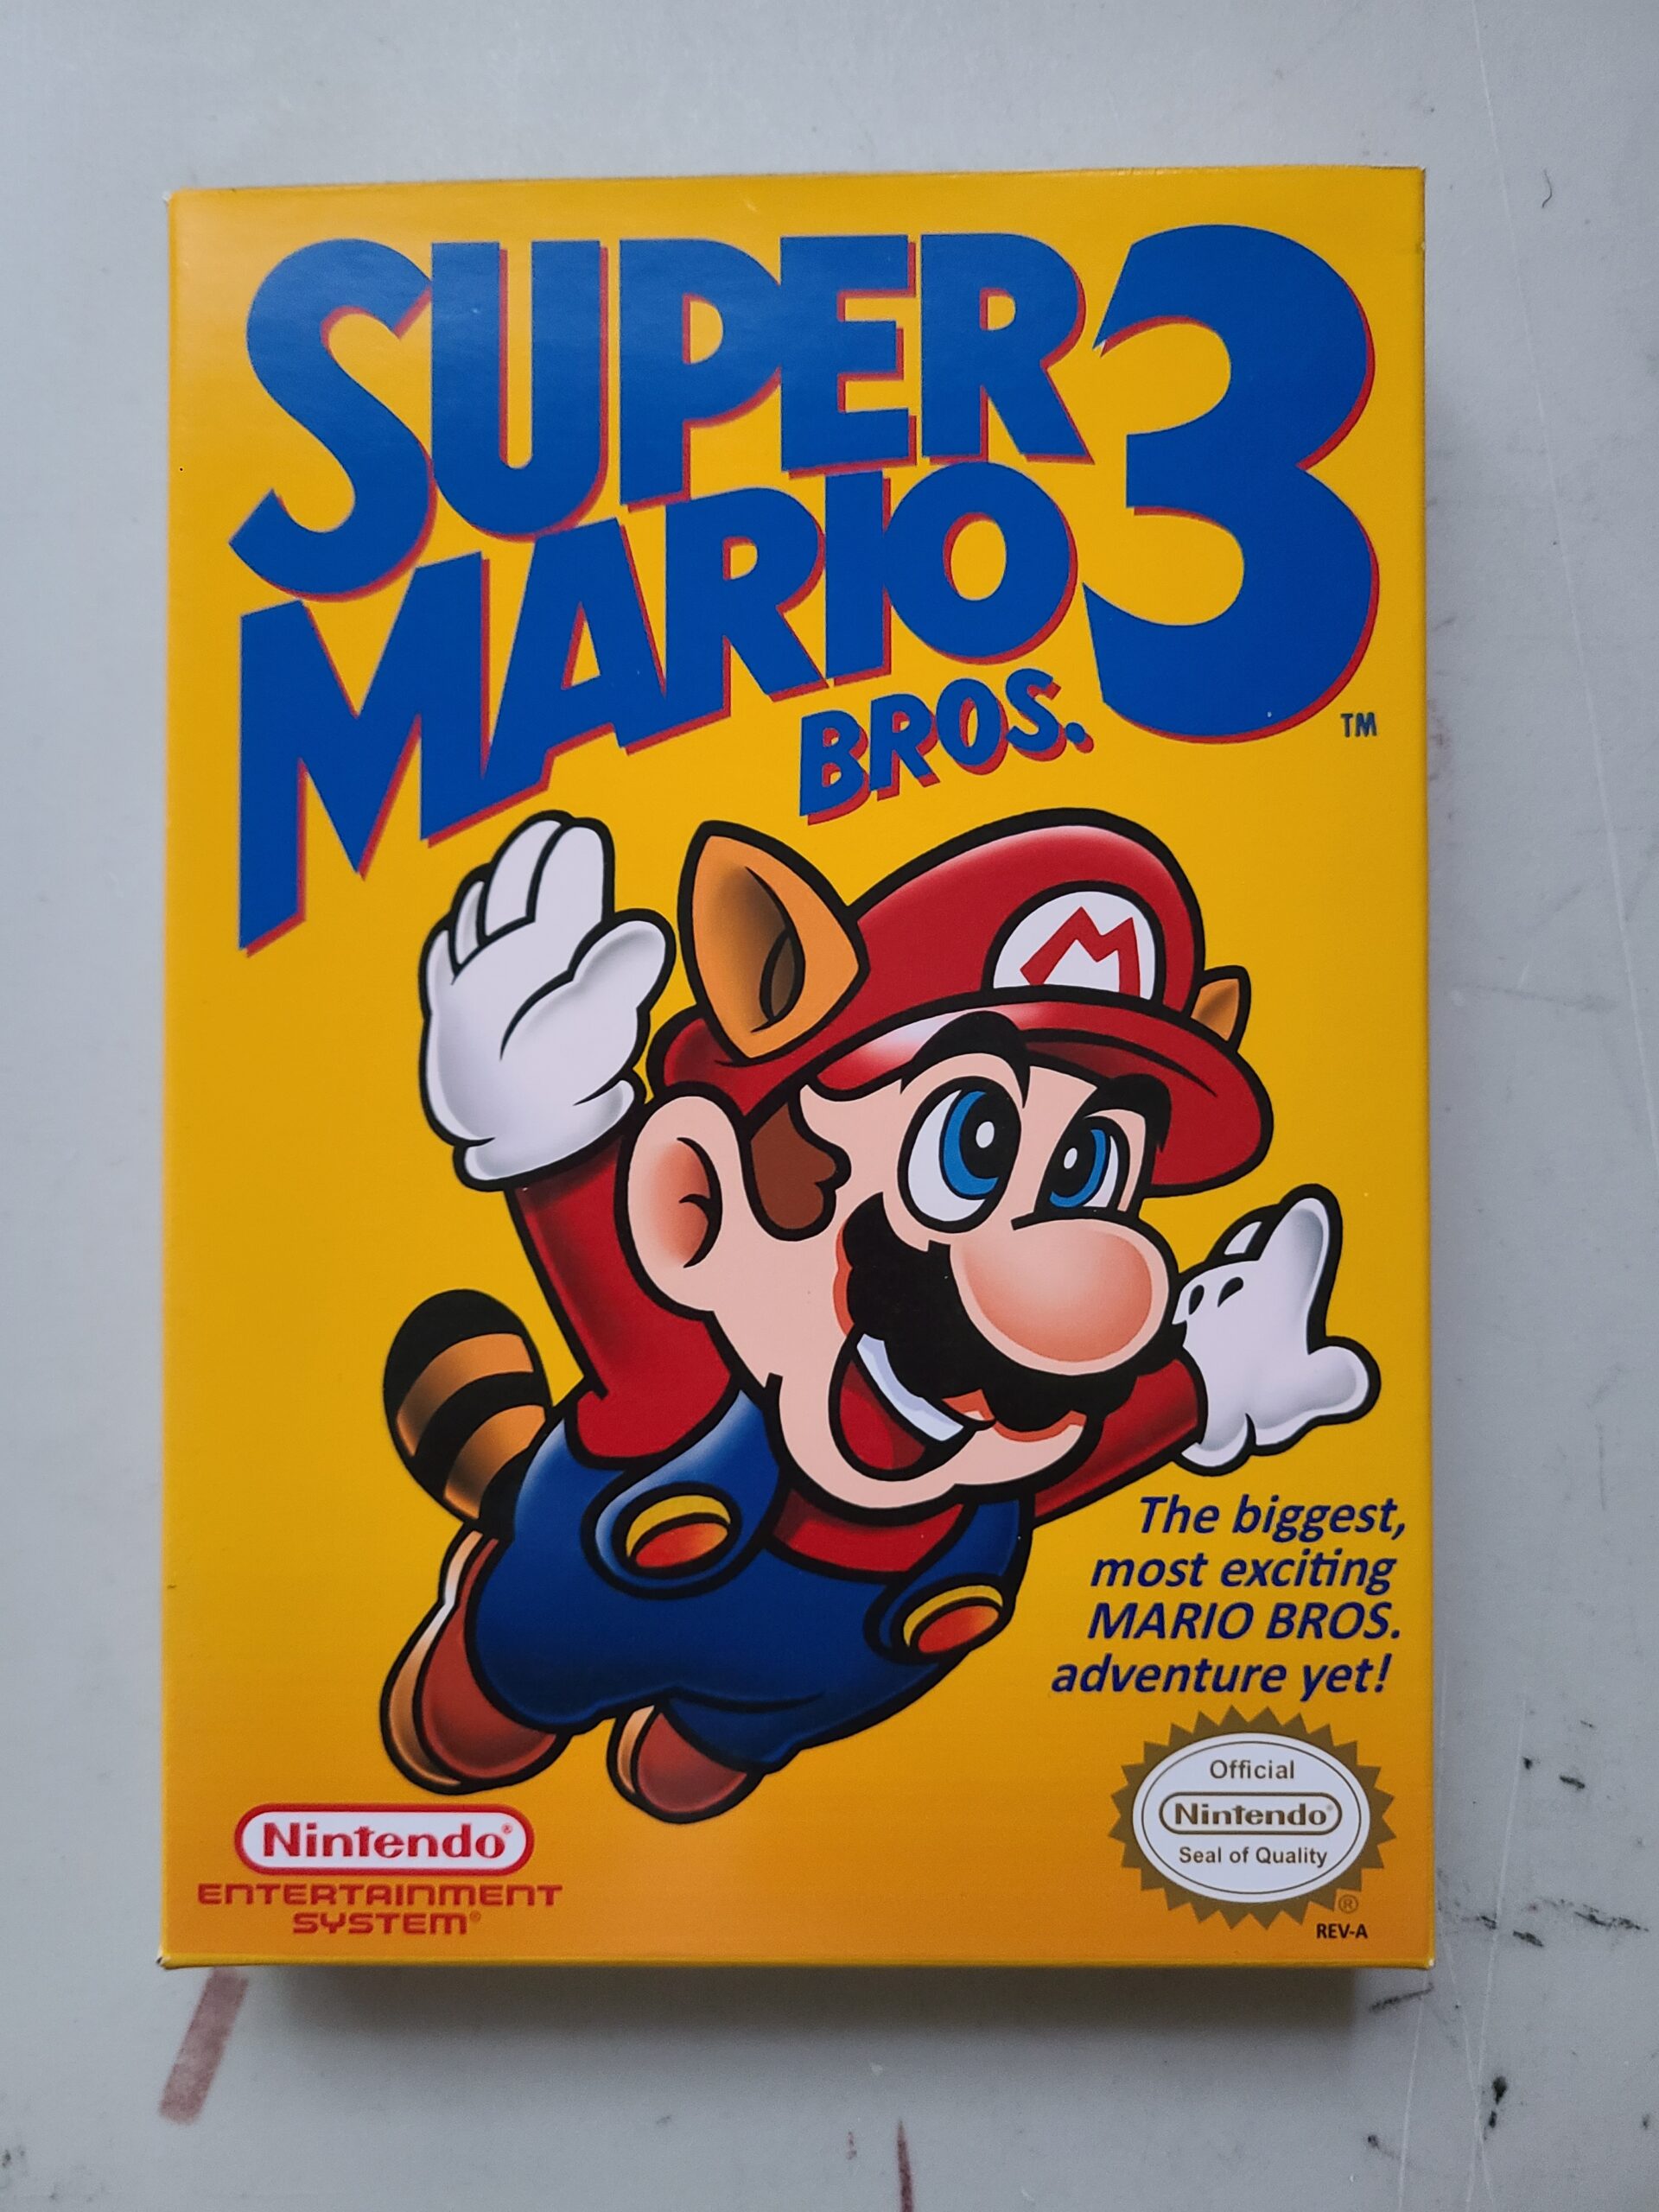 Super Mario 3 for the Nintendo Nes - Konis Games and More